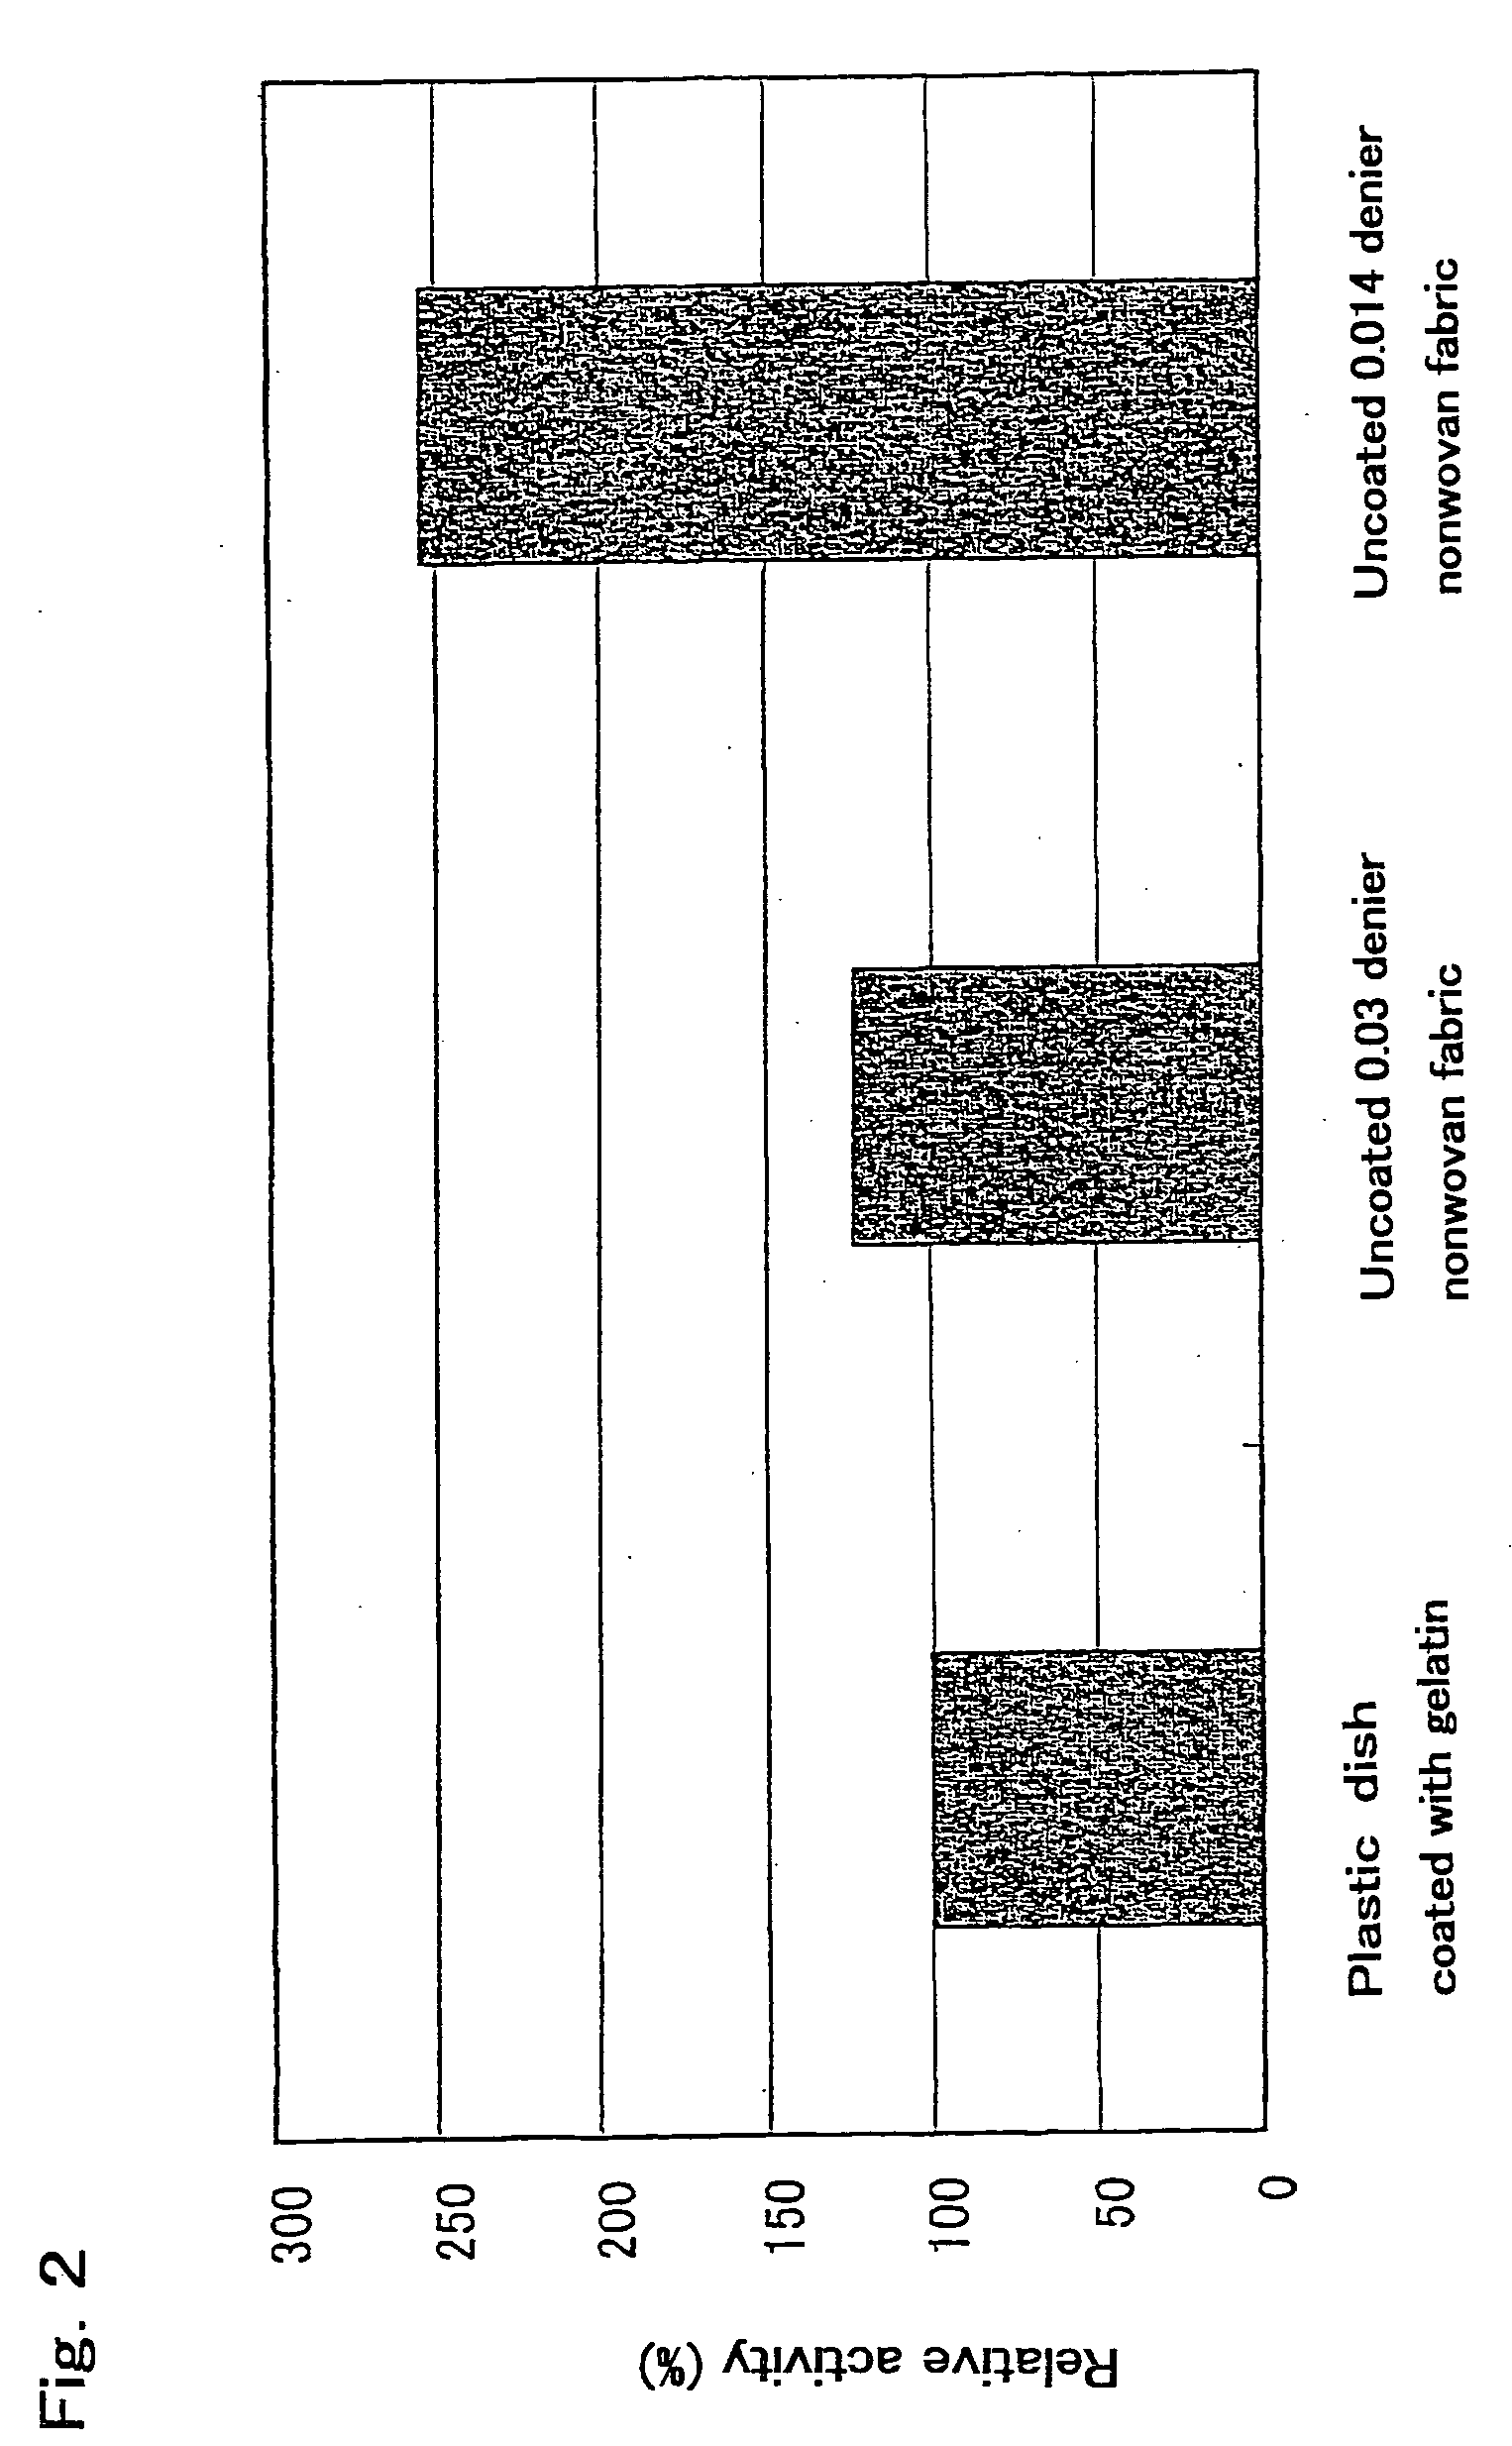 Base material for culturing embryo stem cells and culture method